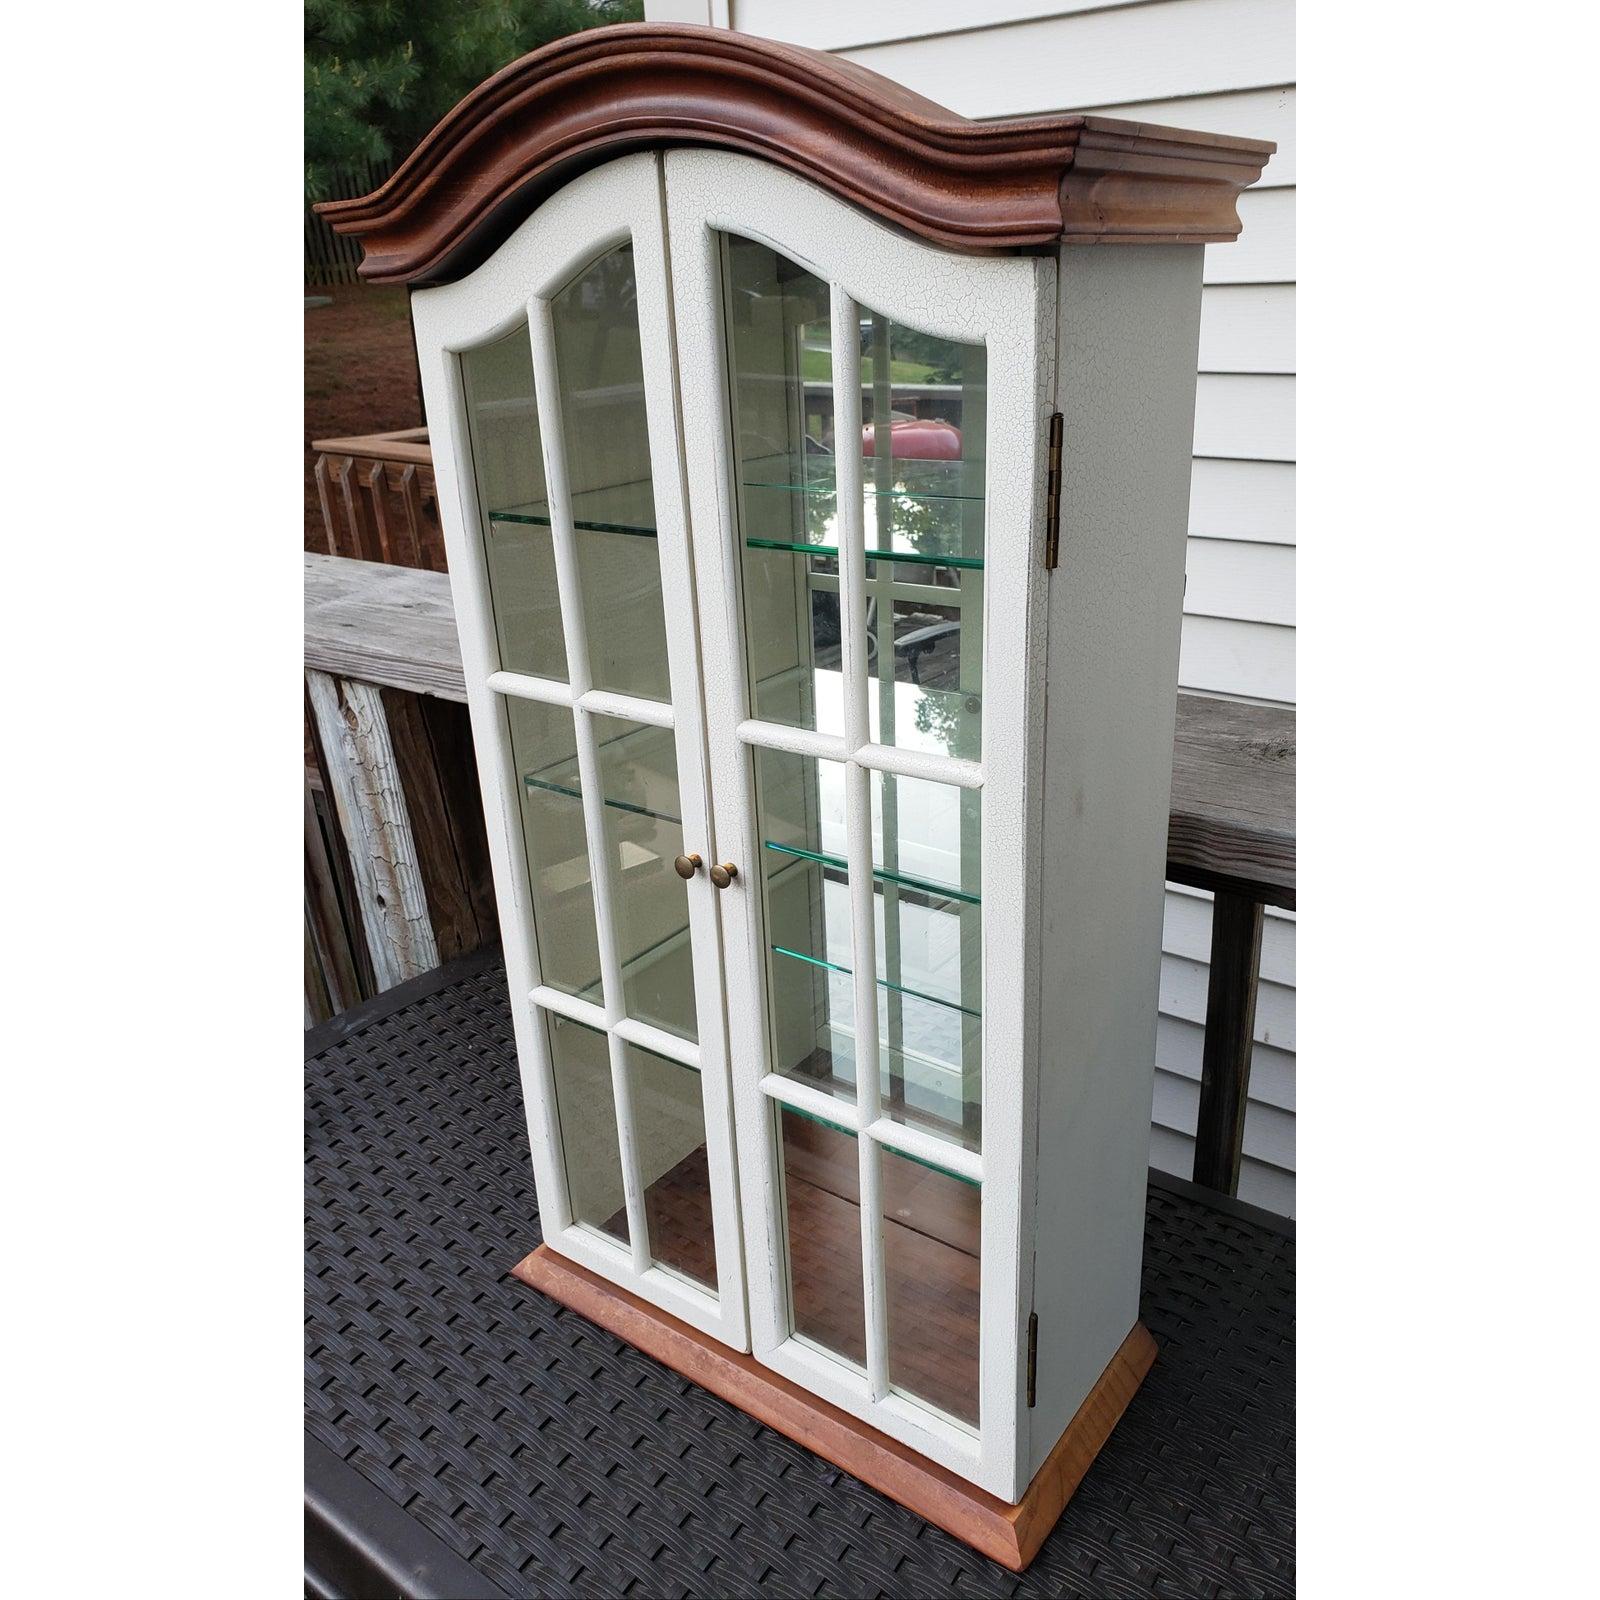 Vintage walnut wood arch top wood and glass wall cabinet. French door. Crackle paint antique white paint. Back mirror and 3 glass shelves. Glass shelves are 14